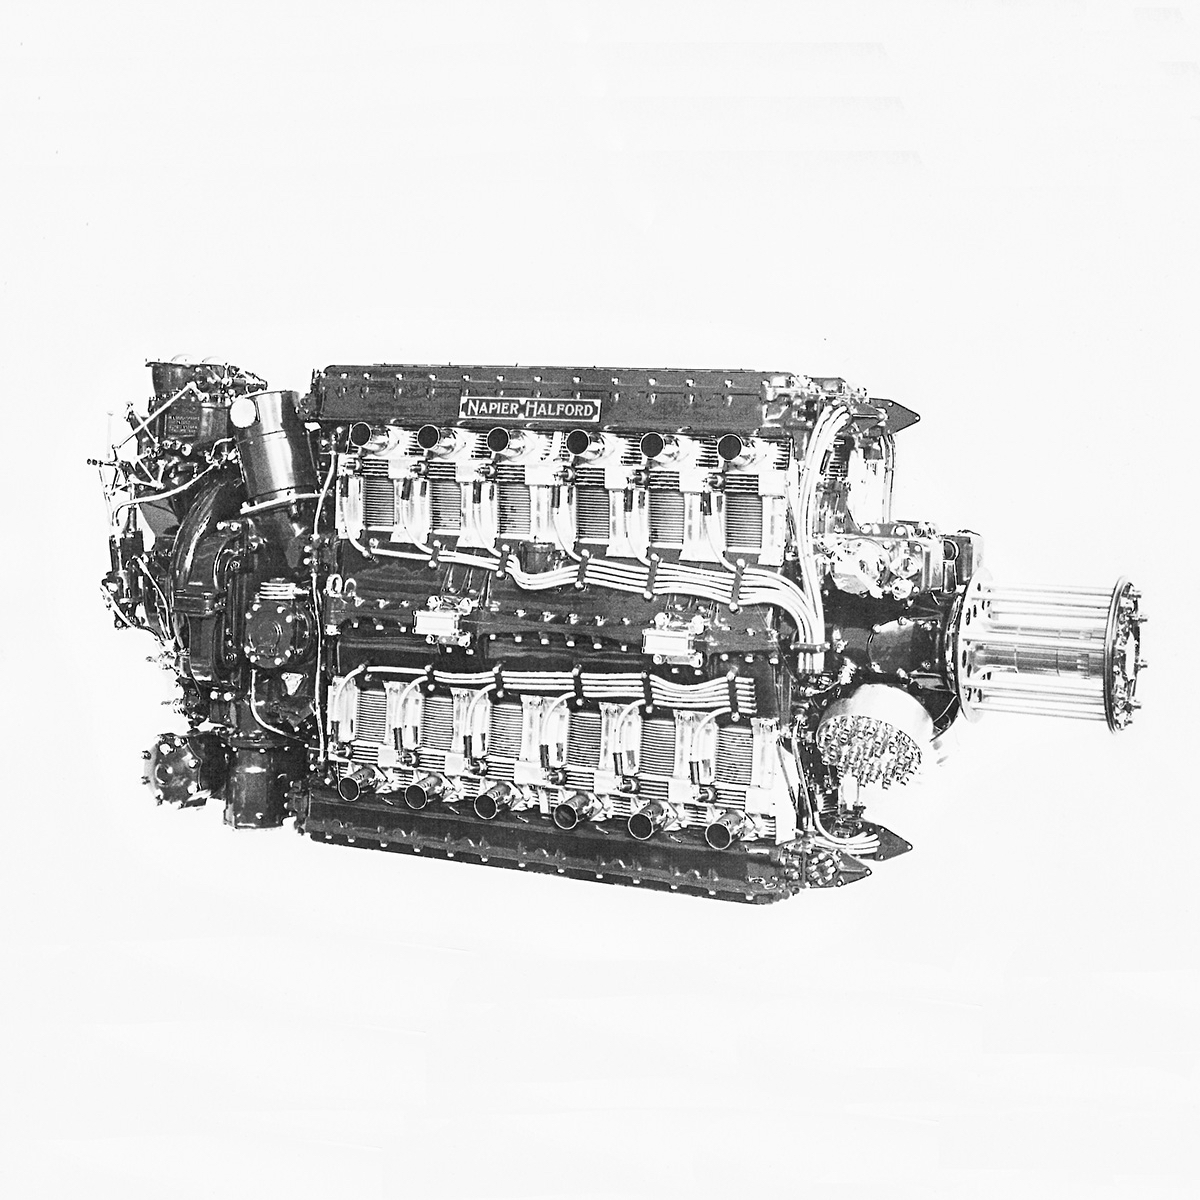 Napier Dagger III engine as used for exhibition in 1936